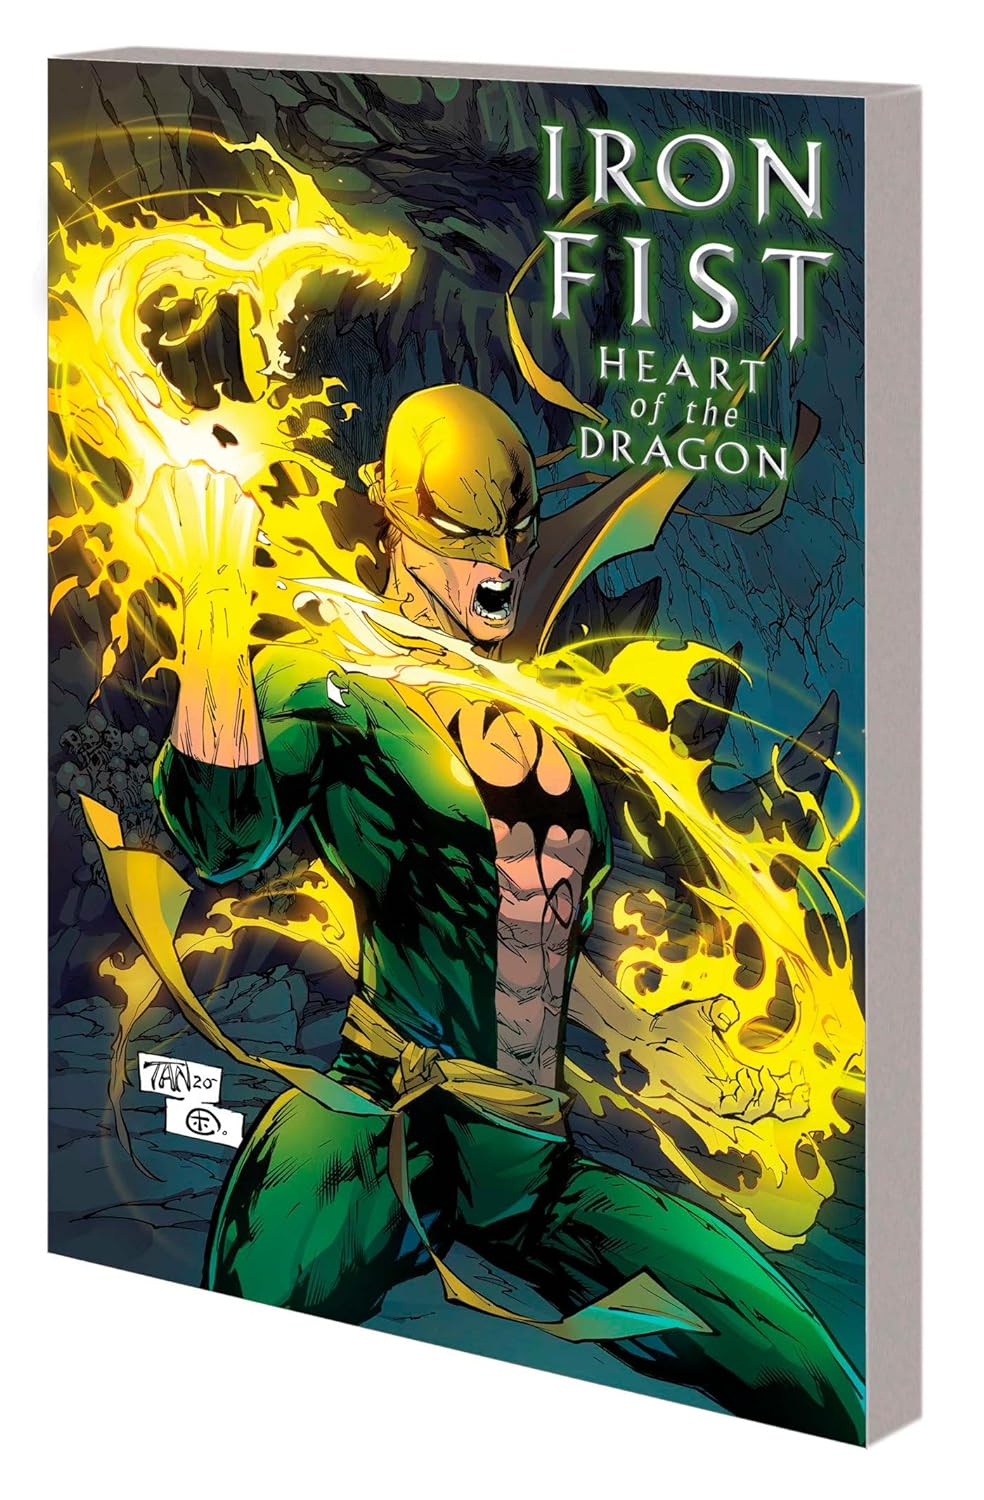 Iron Fist Heart of the Dragon 2021 Comic Book TPB Cover